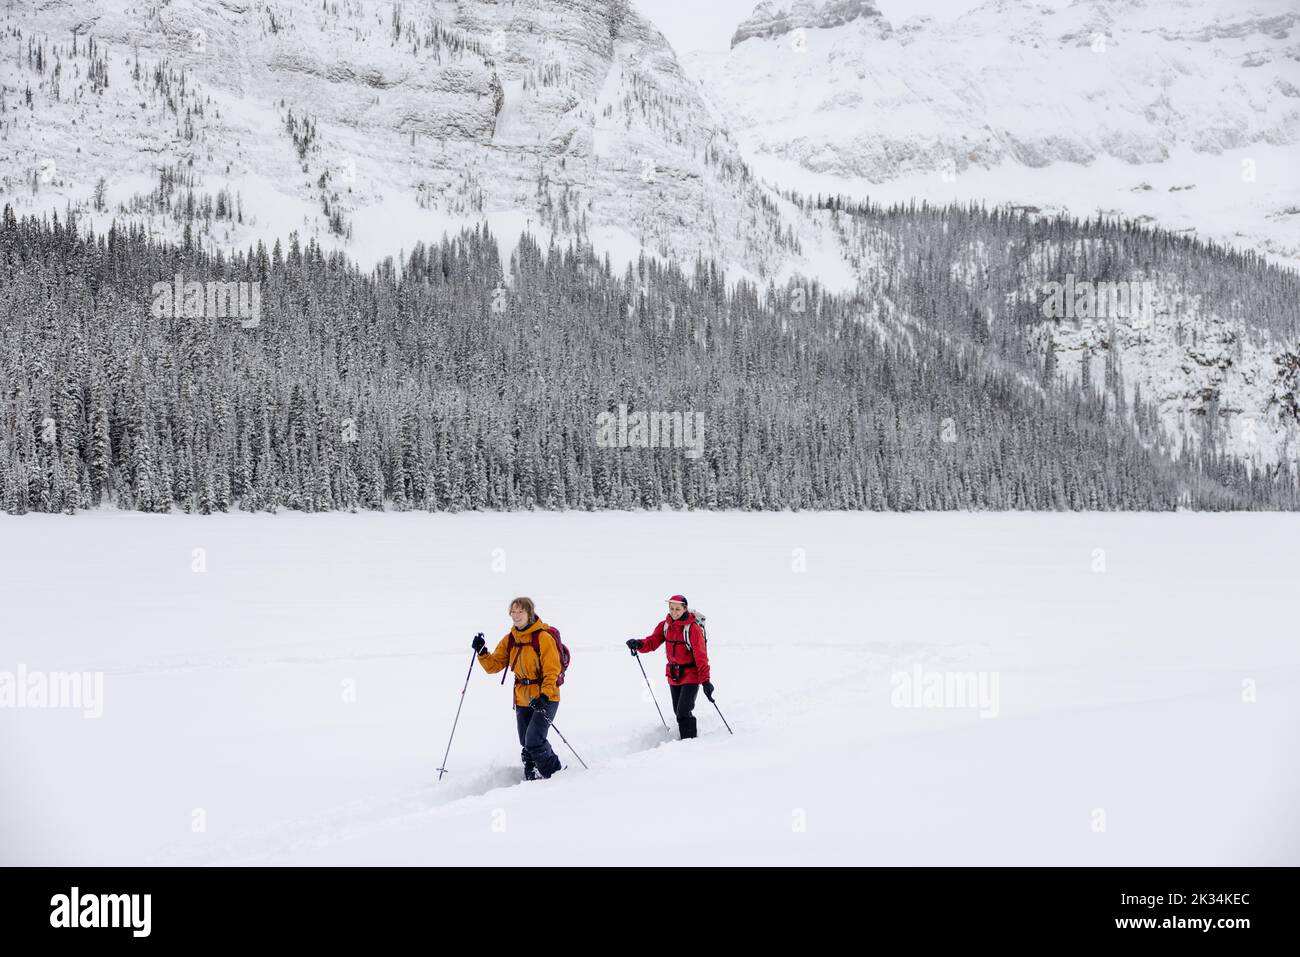 Friends cross country skiing below snowy Canadian Rocky Mountains Stock Photo